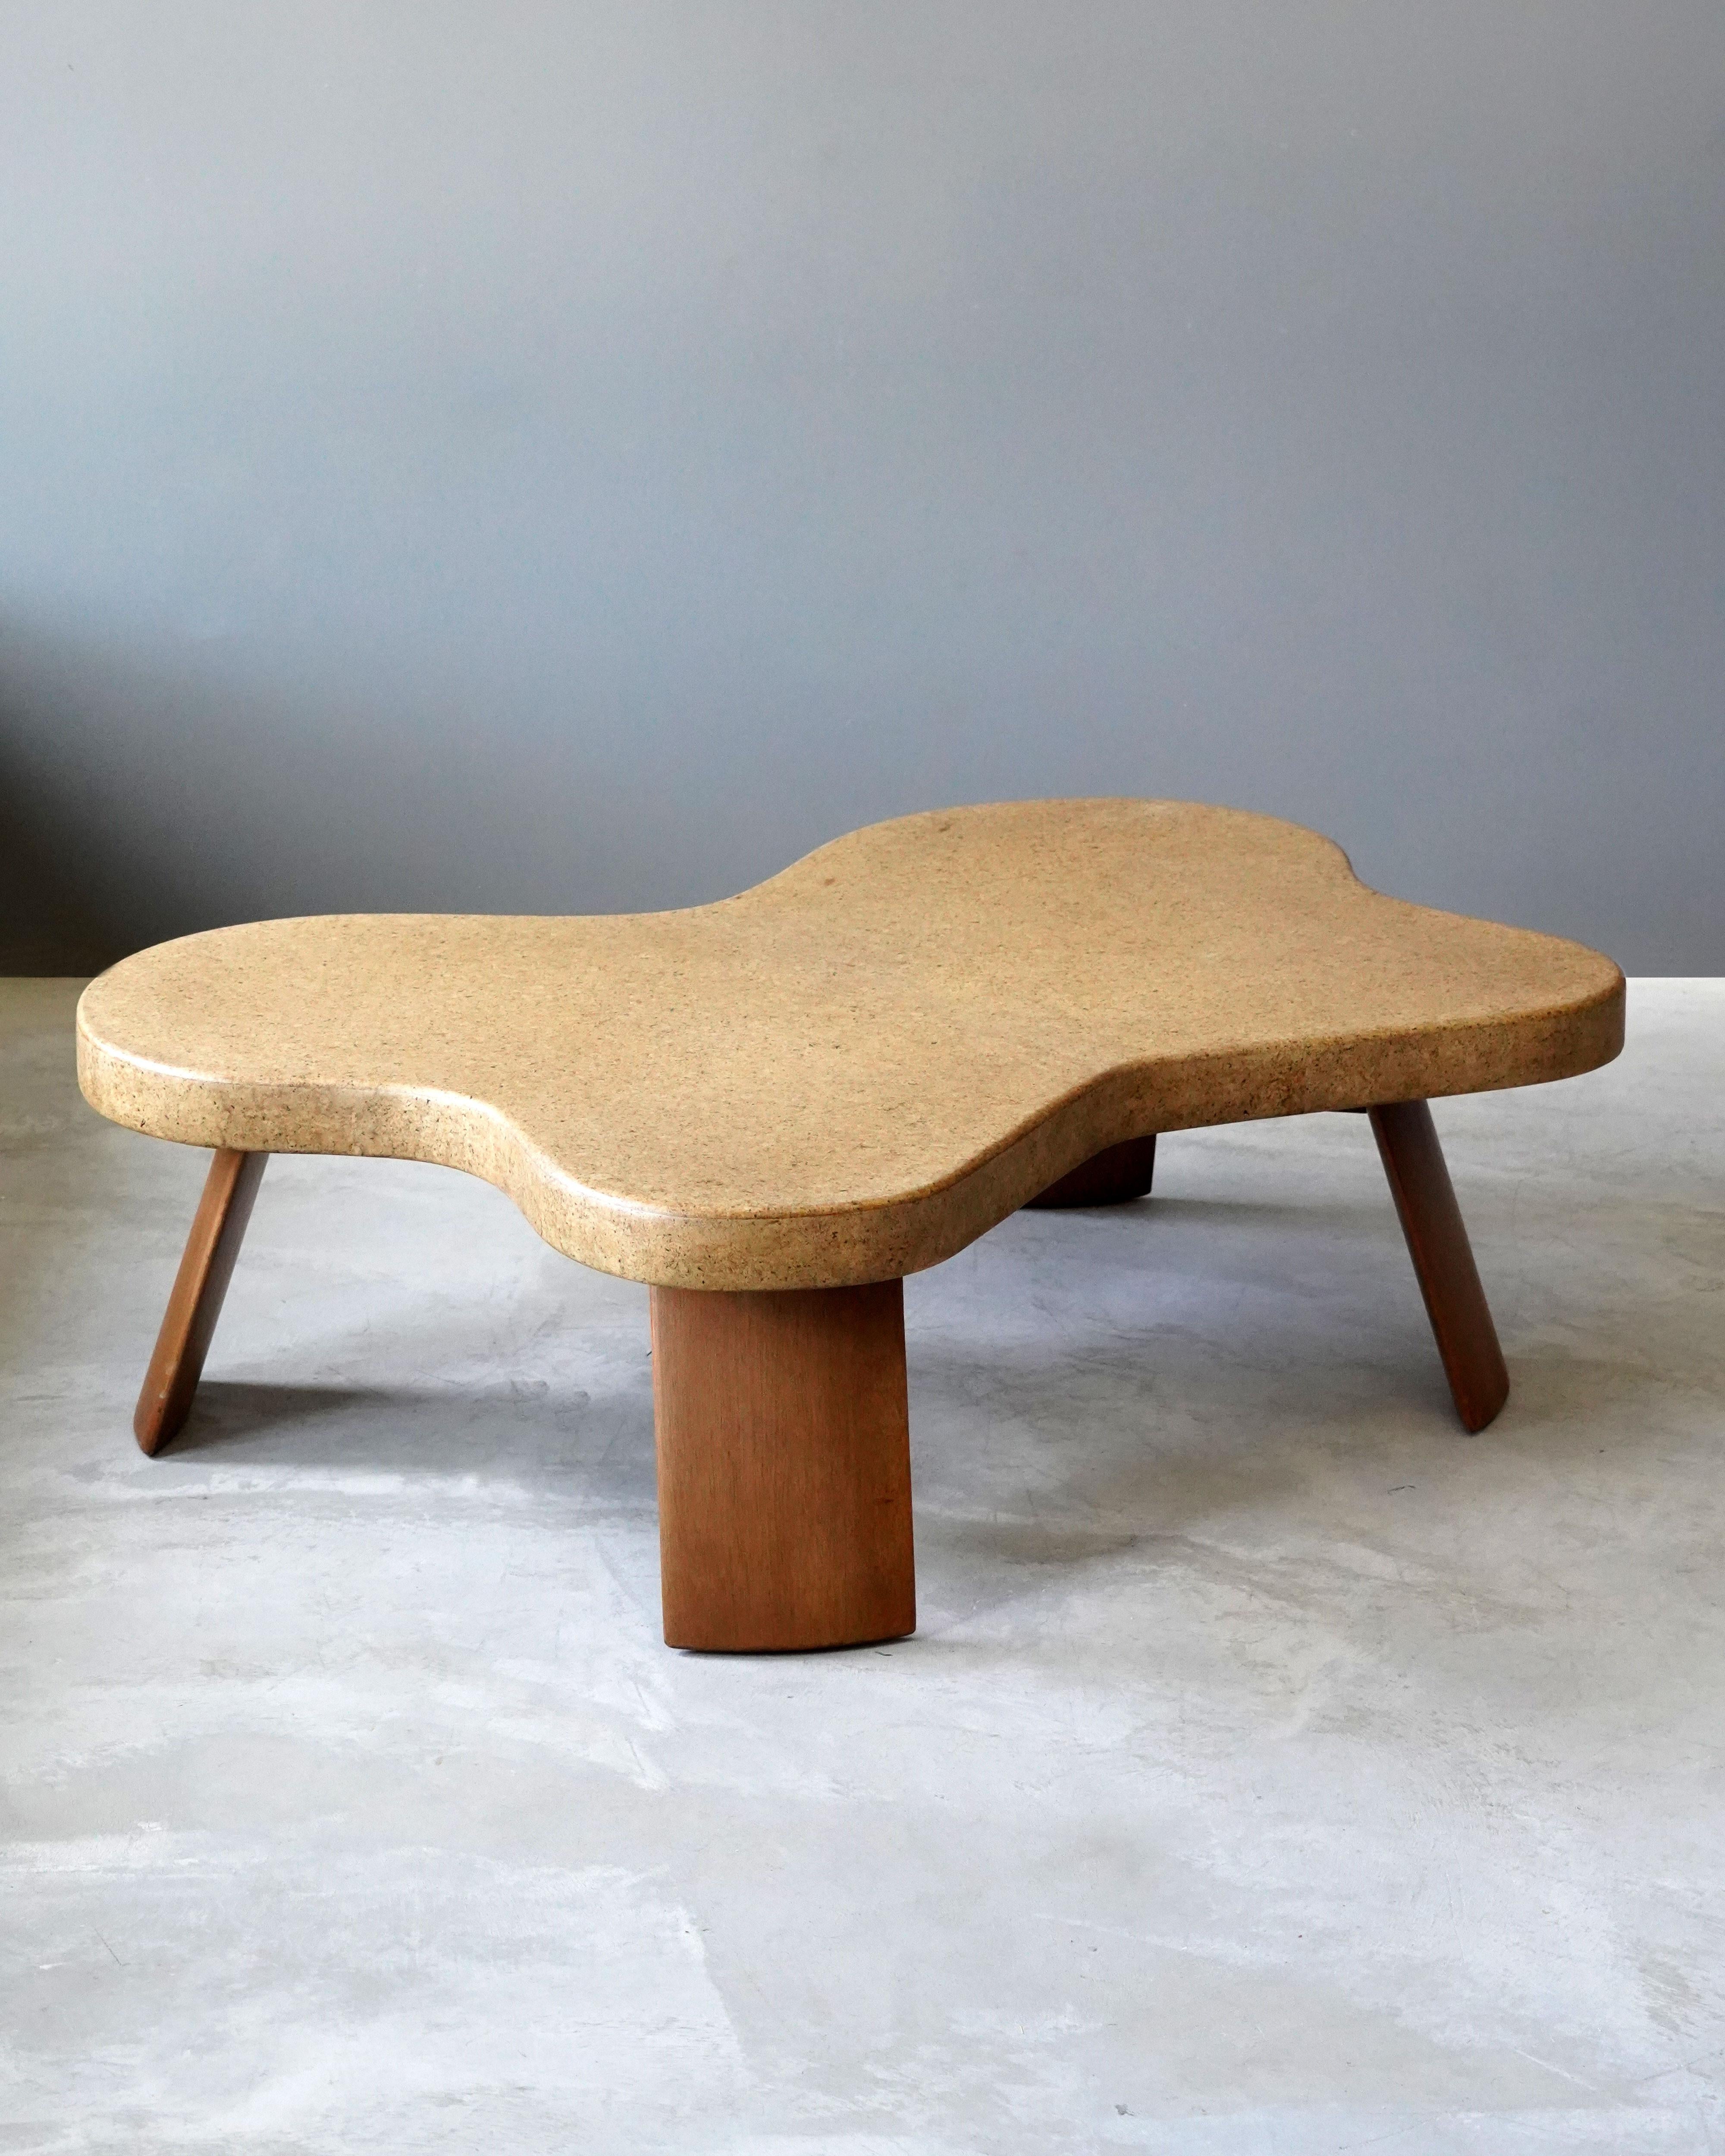 An organic or biomorphic or freeform coffee or cocktail table. Designed by Paul Frankl. Produced by Johnson Furniture Company, early 1950s. Model 5005.

Executed in cork-venered wood top, stained mahogany legs. 
 
Other designers working in the